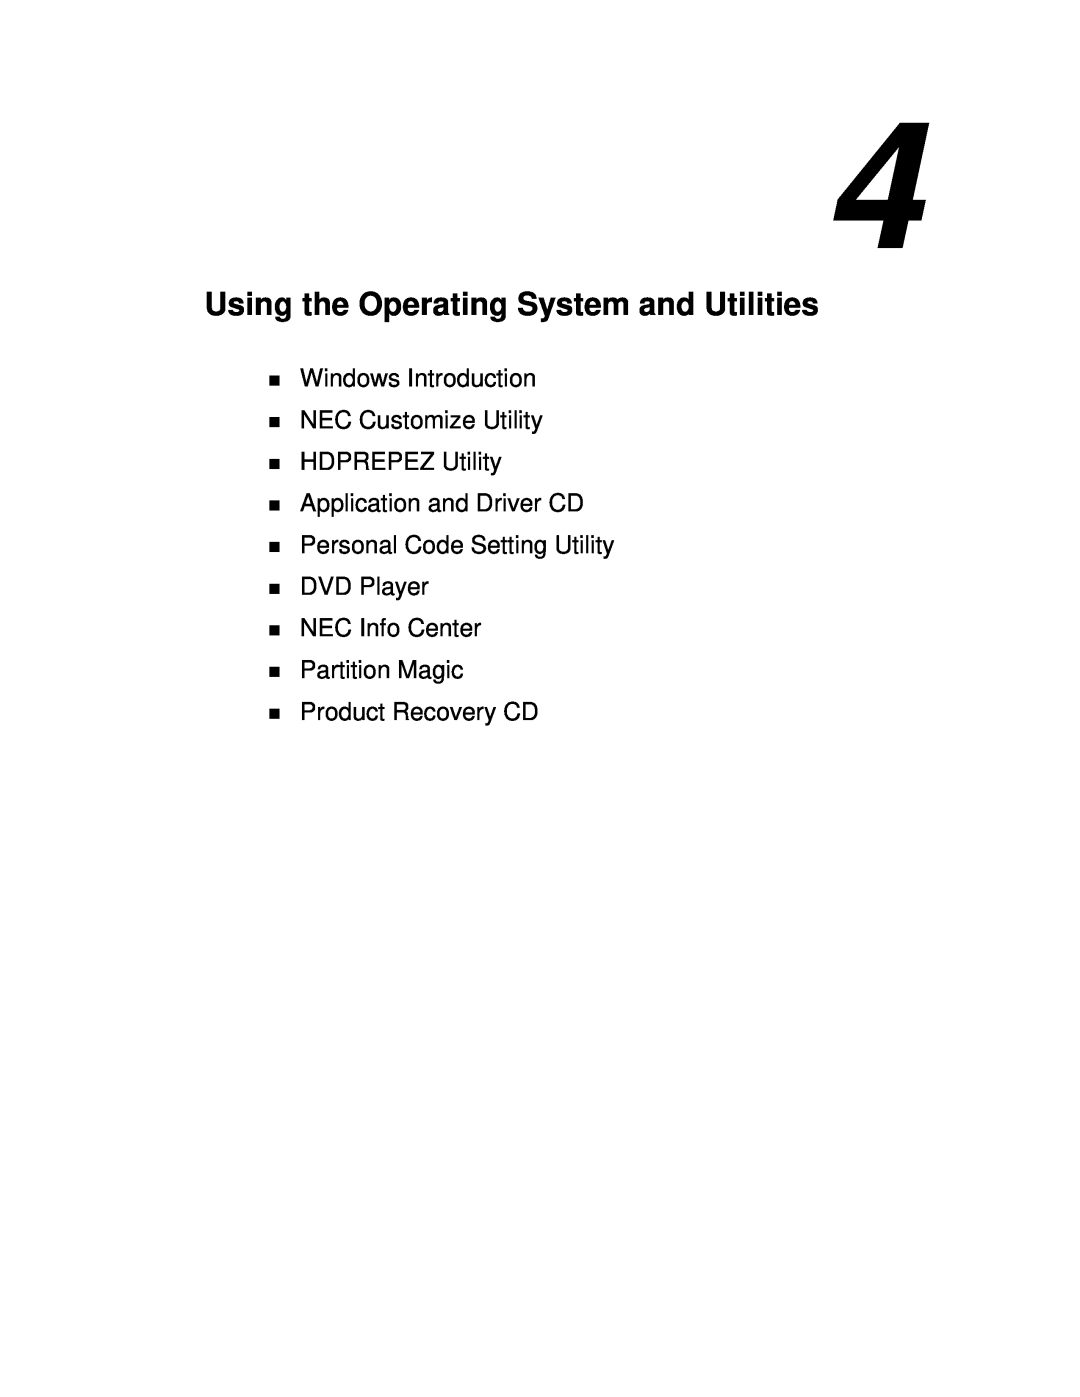 NEC VX manual Using the Operating System and Utilities, Windows Introduction NEC Customize Utility HDPREPEZ Utility 